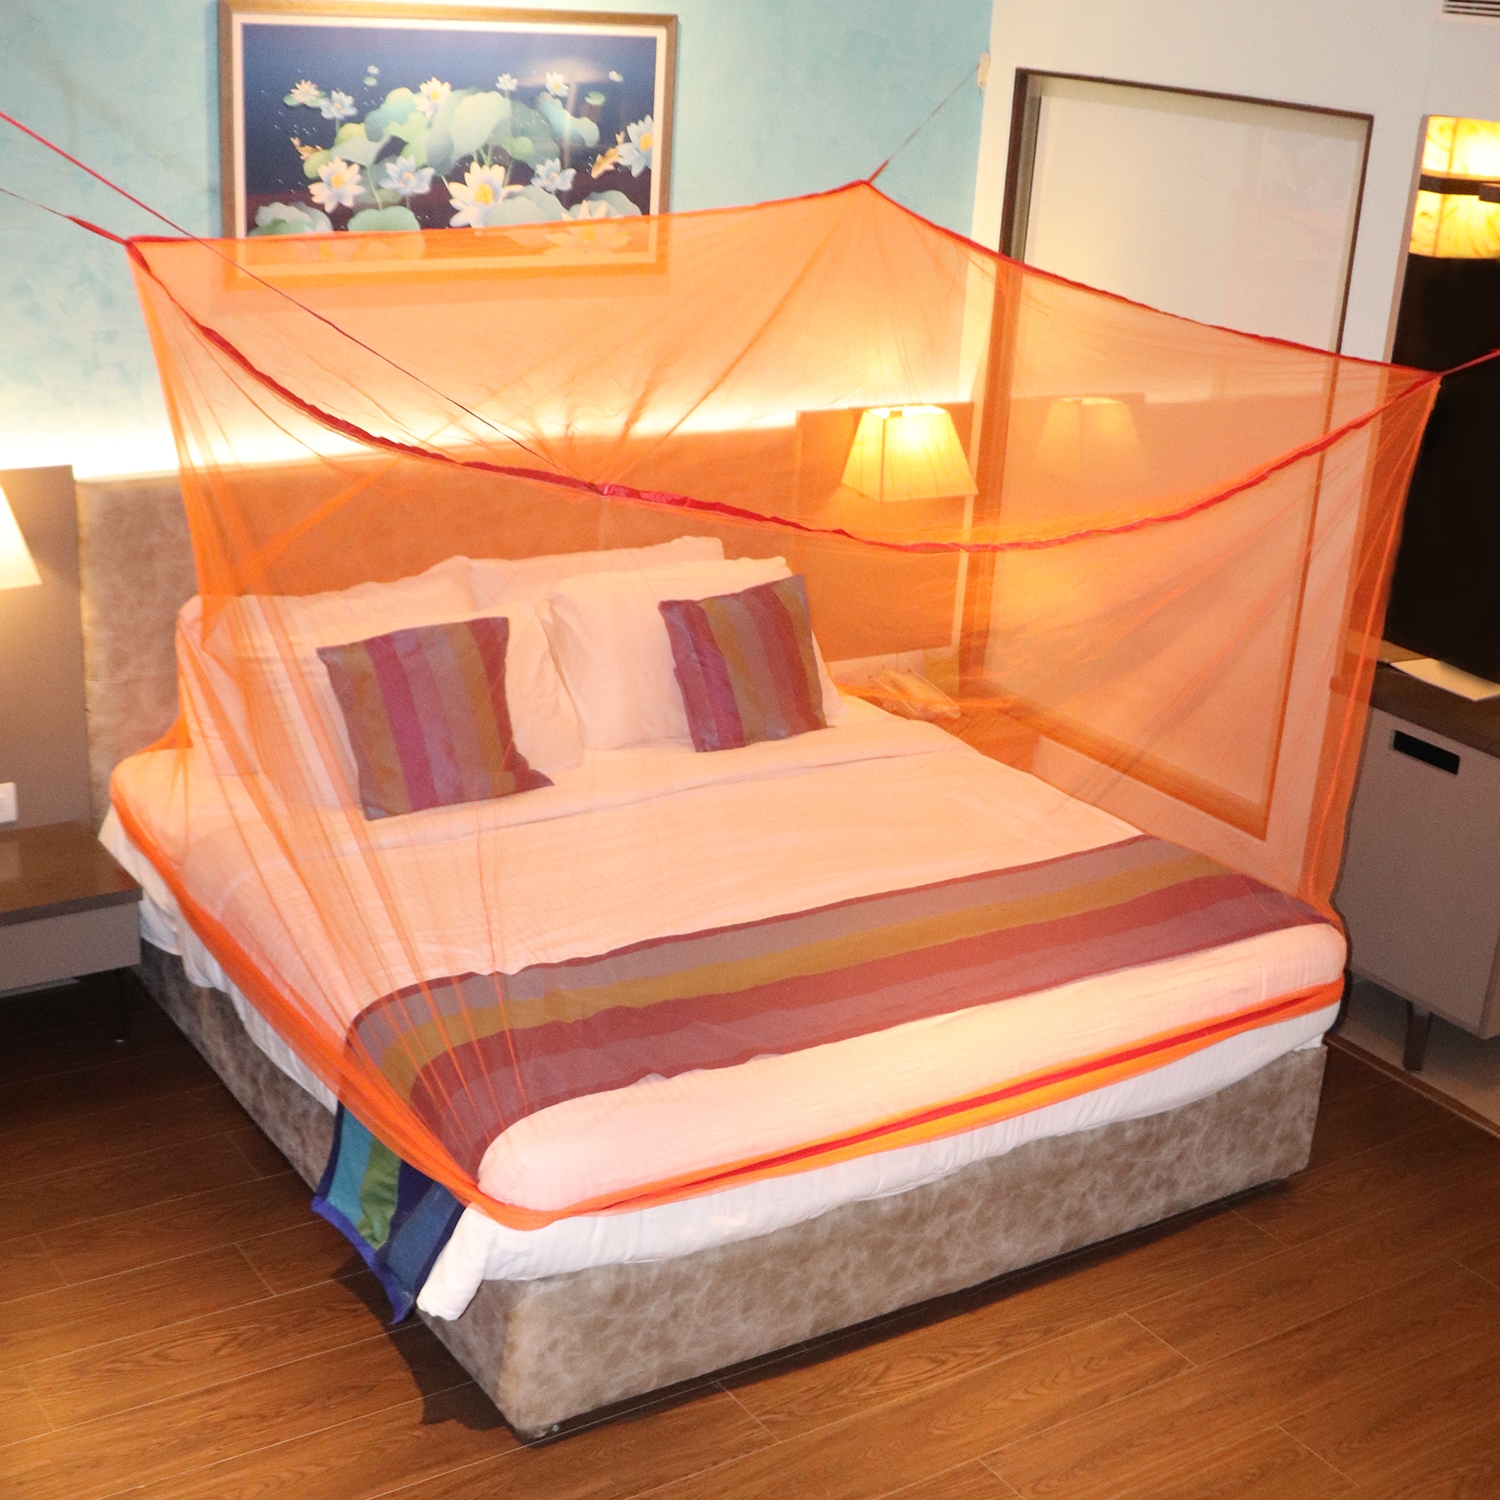 Mosquito Net for Double Bed, King-Size, Square Hanging Foldable Polyester Net Orange